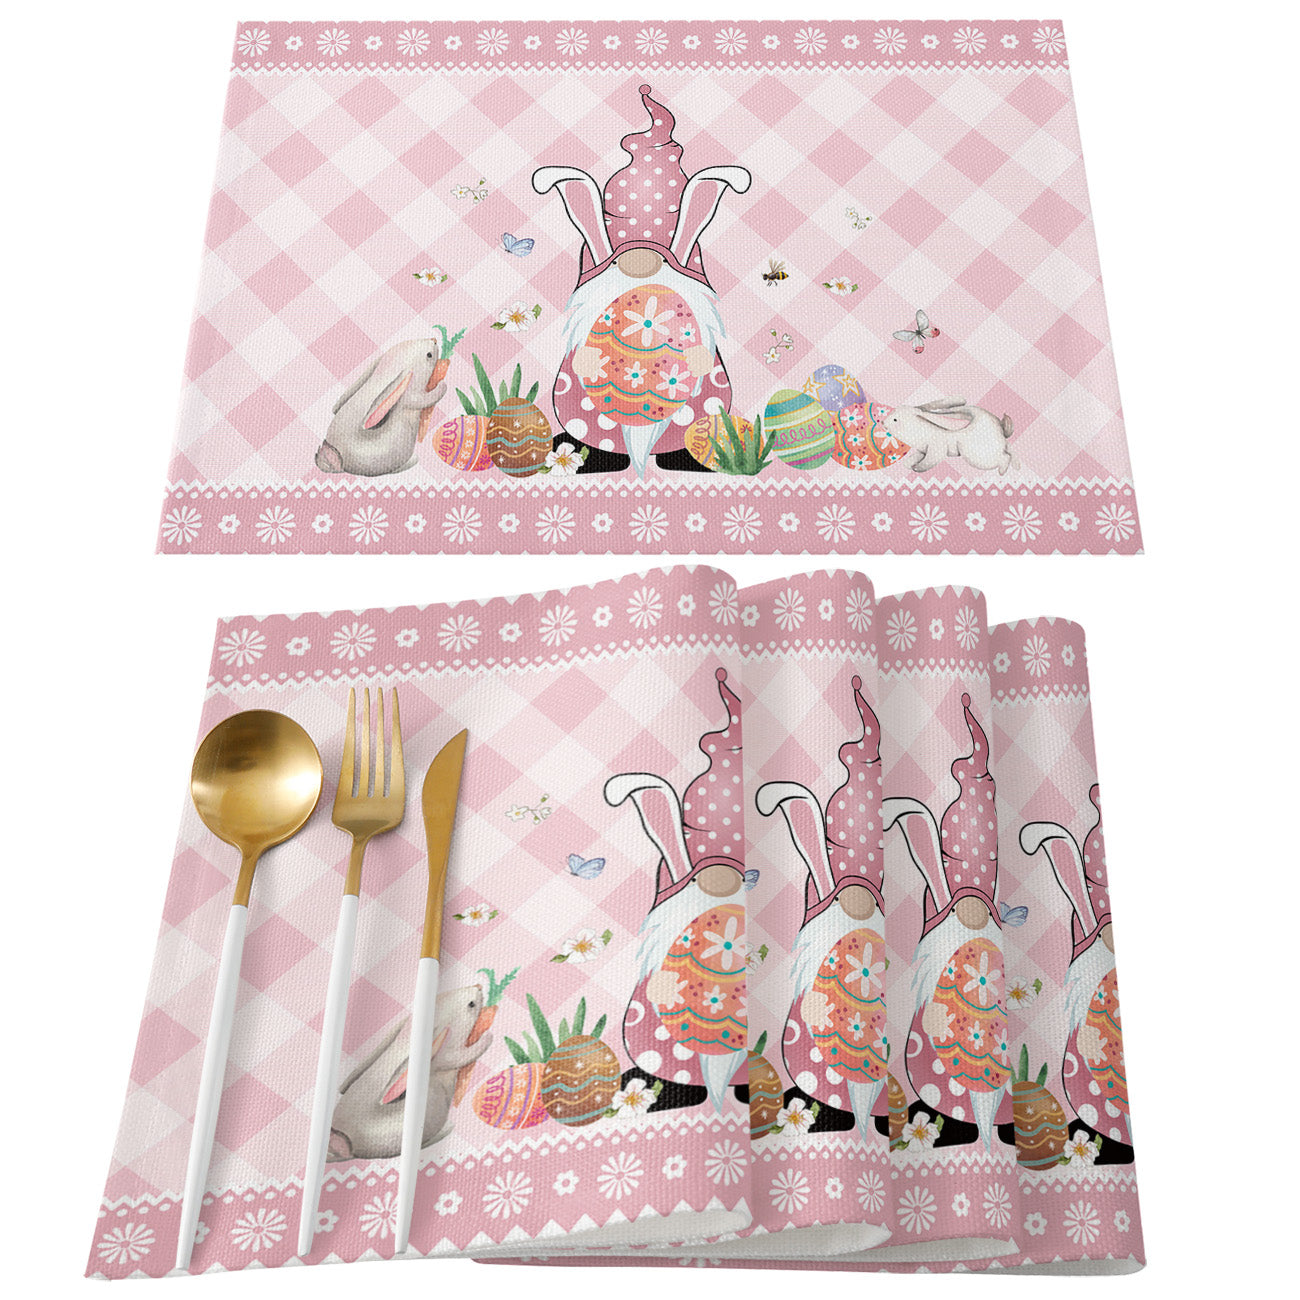 Gnome Holding Egg - Easter Themed Placemat